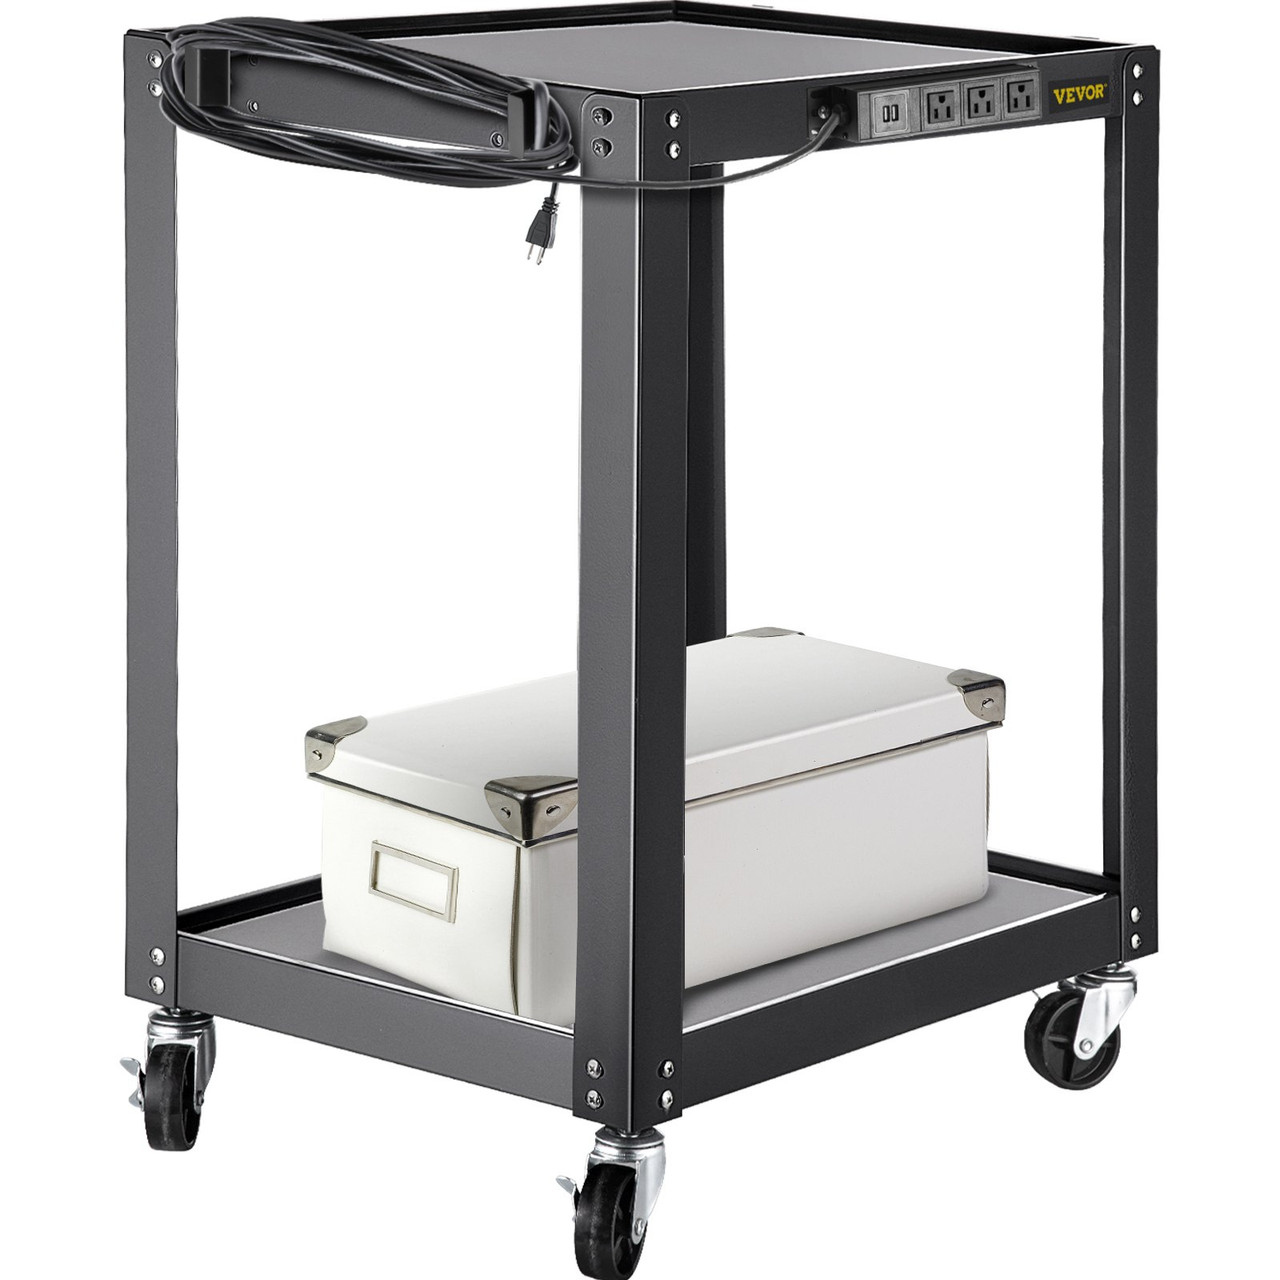 AV Cart, 26 Inch Height Media Cart with Power Strip, 24 x 18" Presentation Cart with 2 Shelves, 4 Rolling Casters and 2 Locking Brakes, 150 lbs Heavy- Duty Av Cart Fit for Offices and Schools